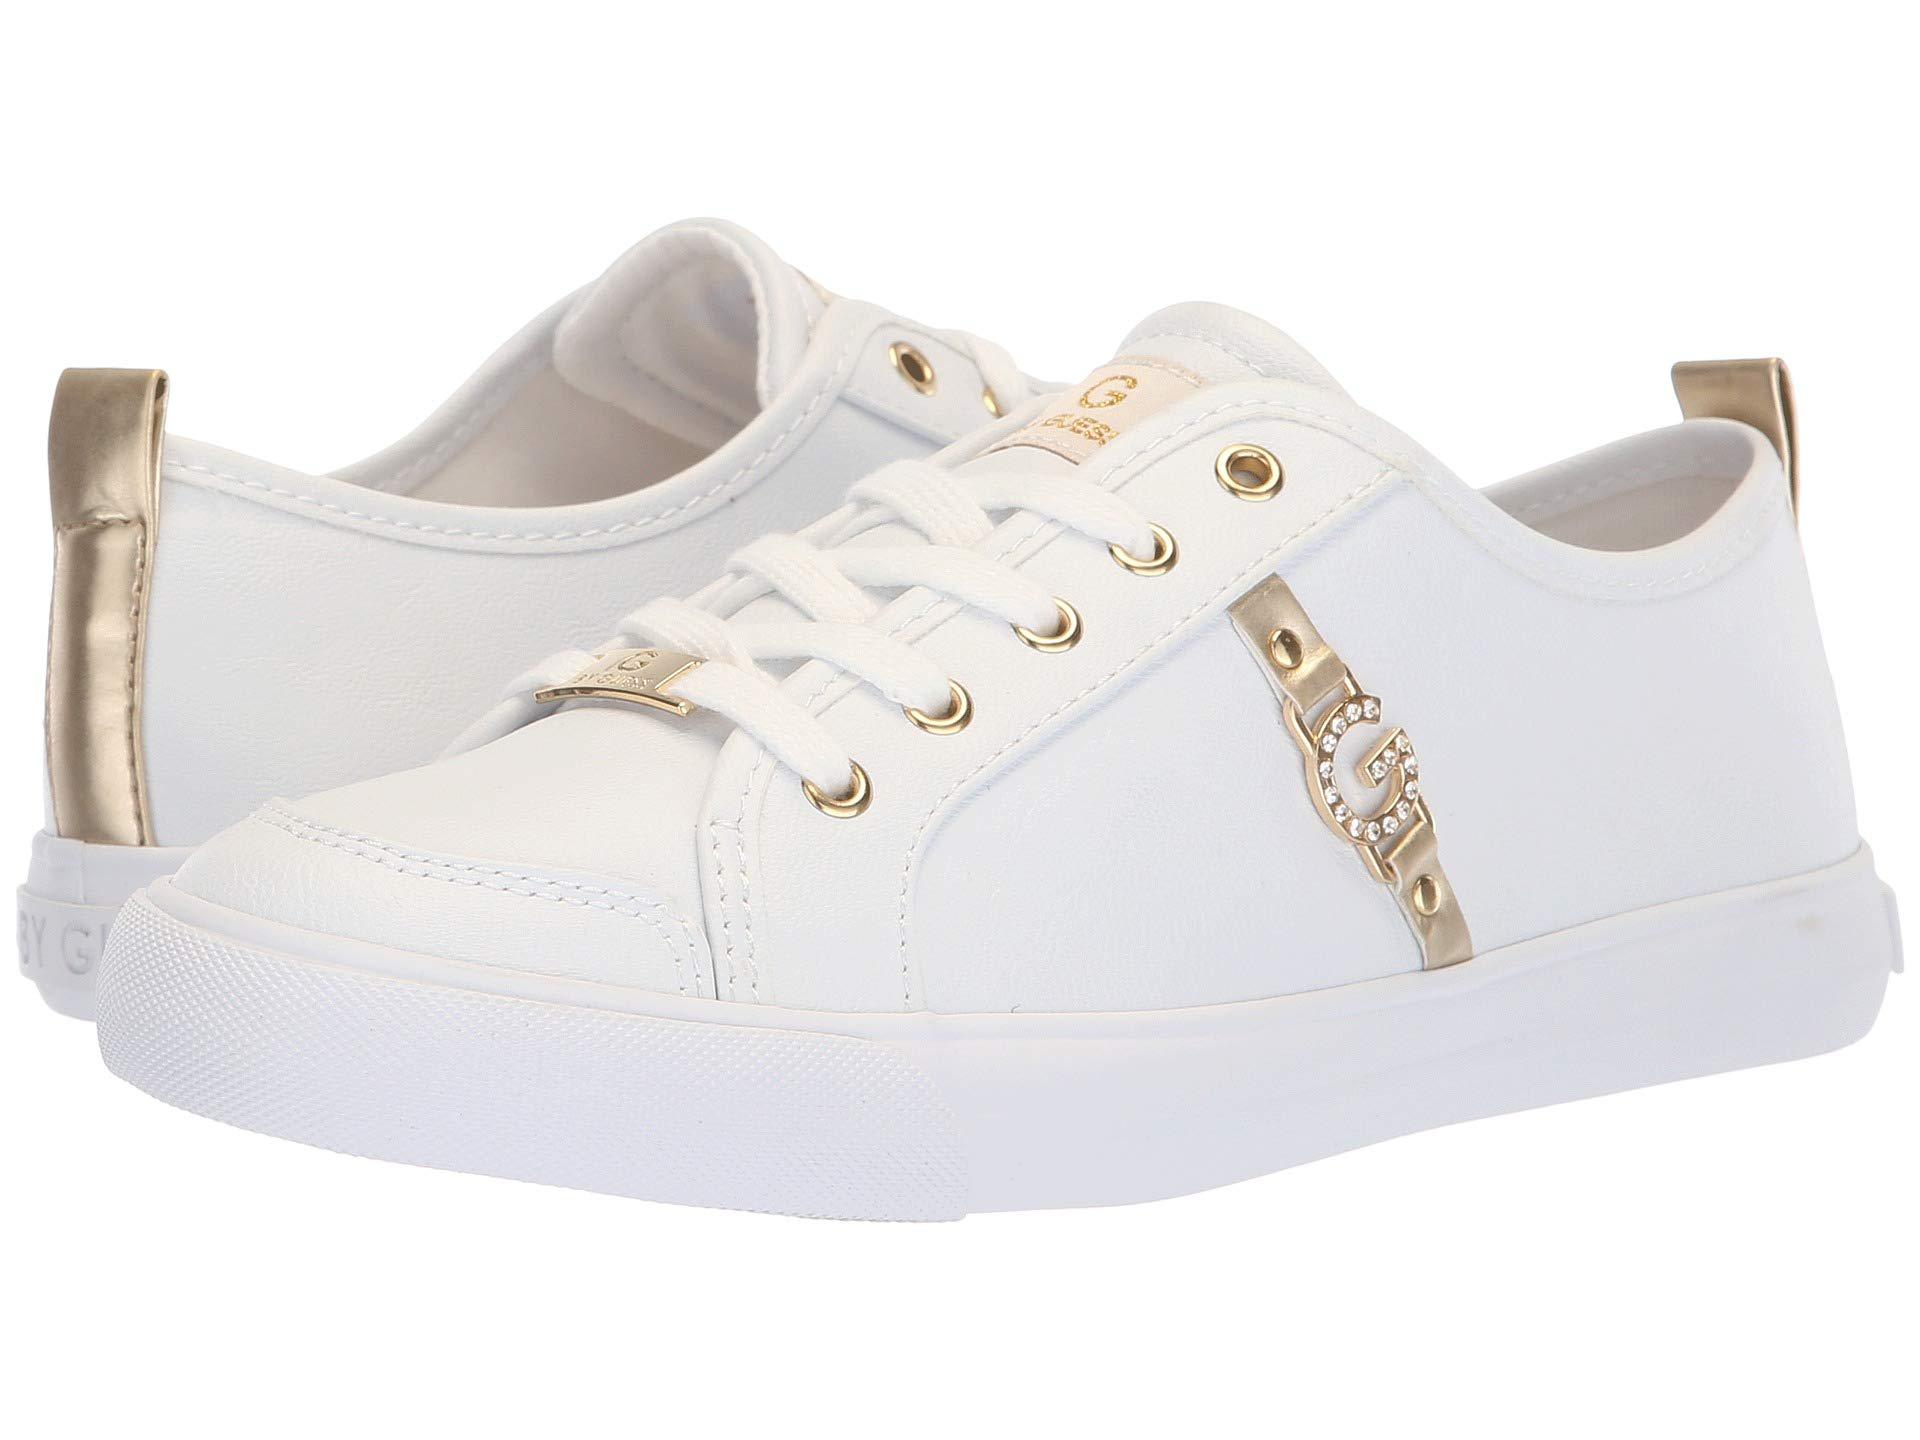 G Guess Banx2 (white/gold/gold) Women's Shoes | Lyst